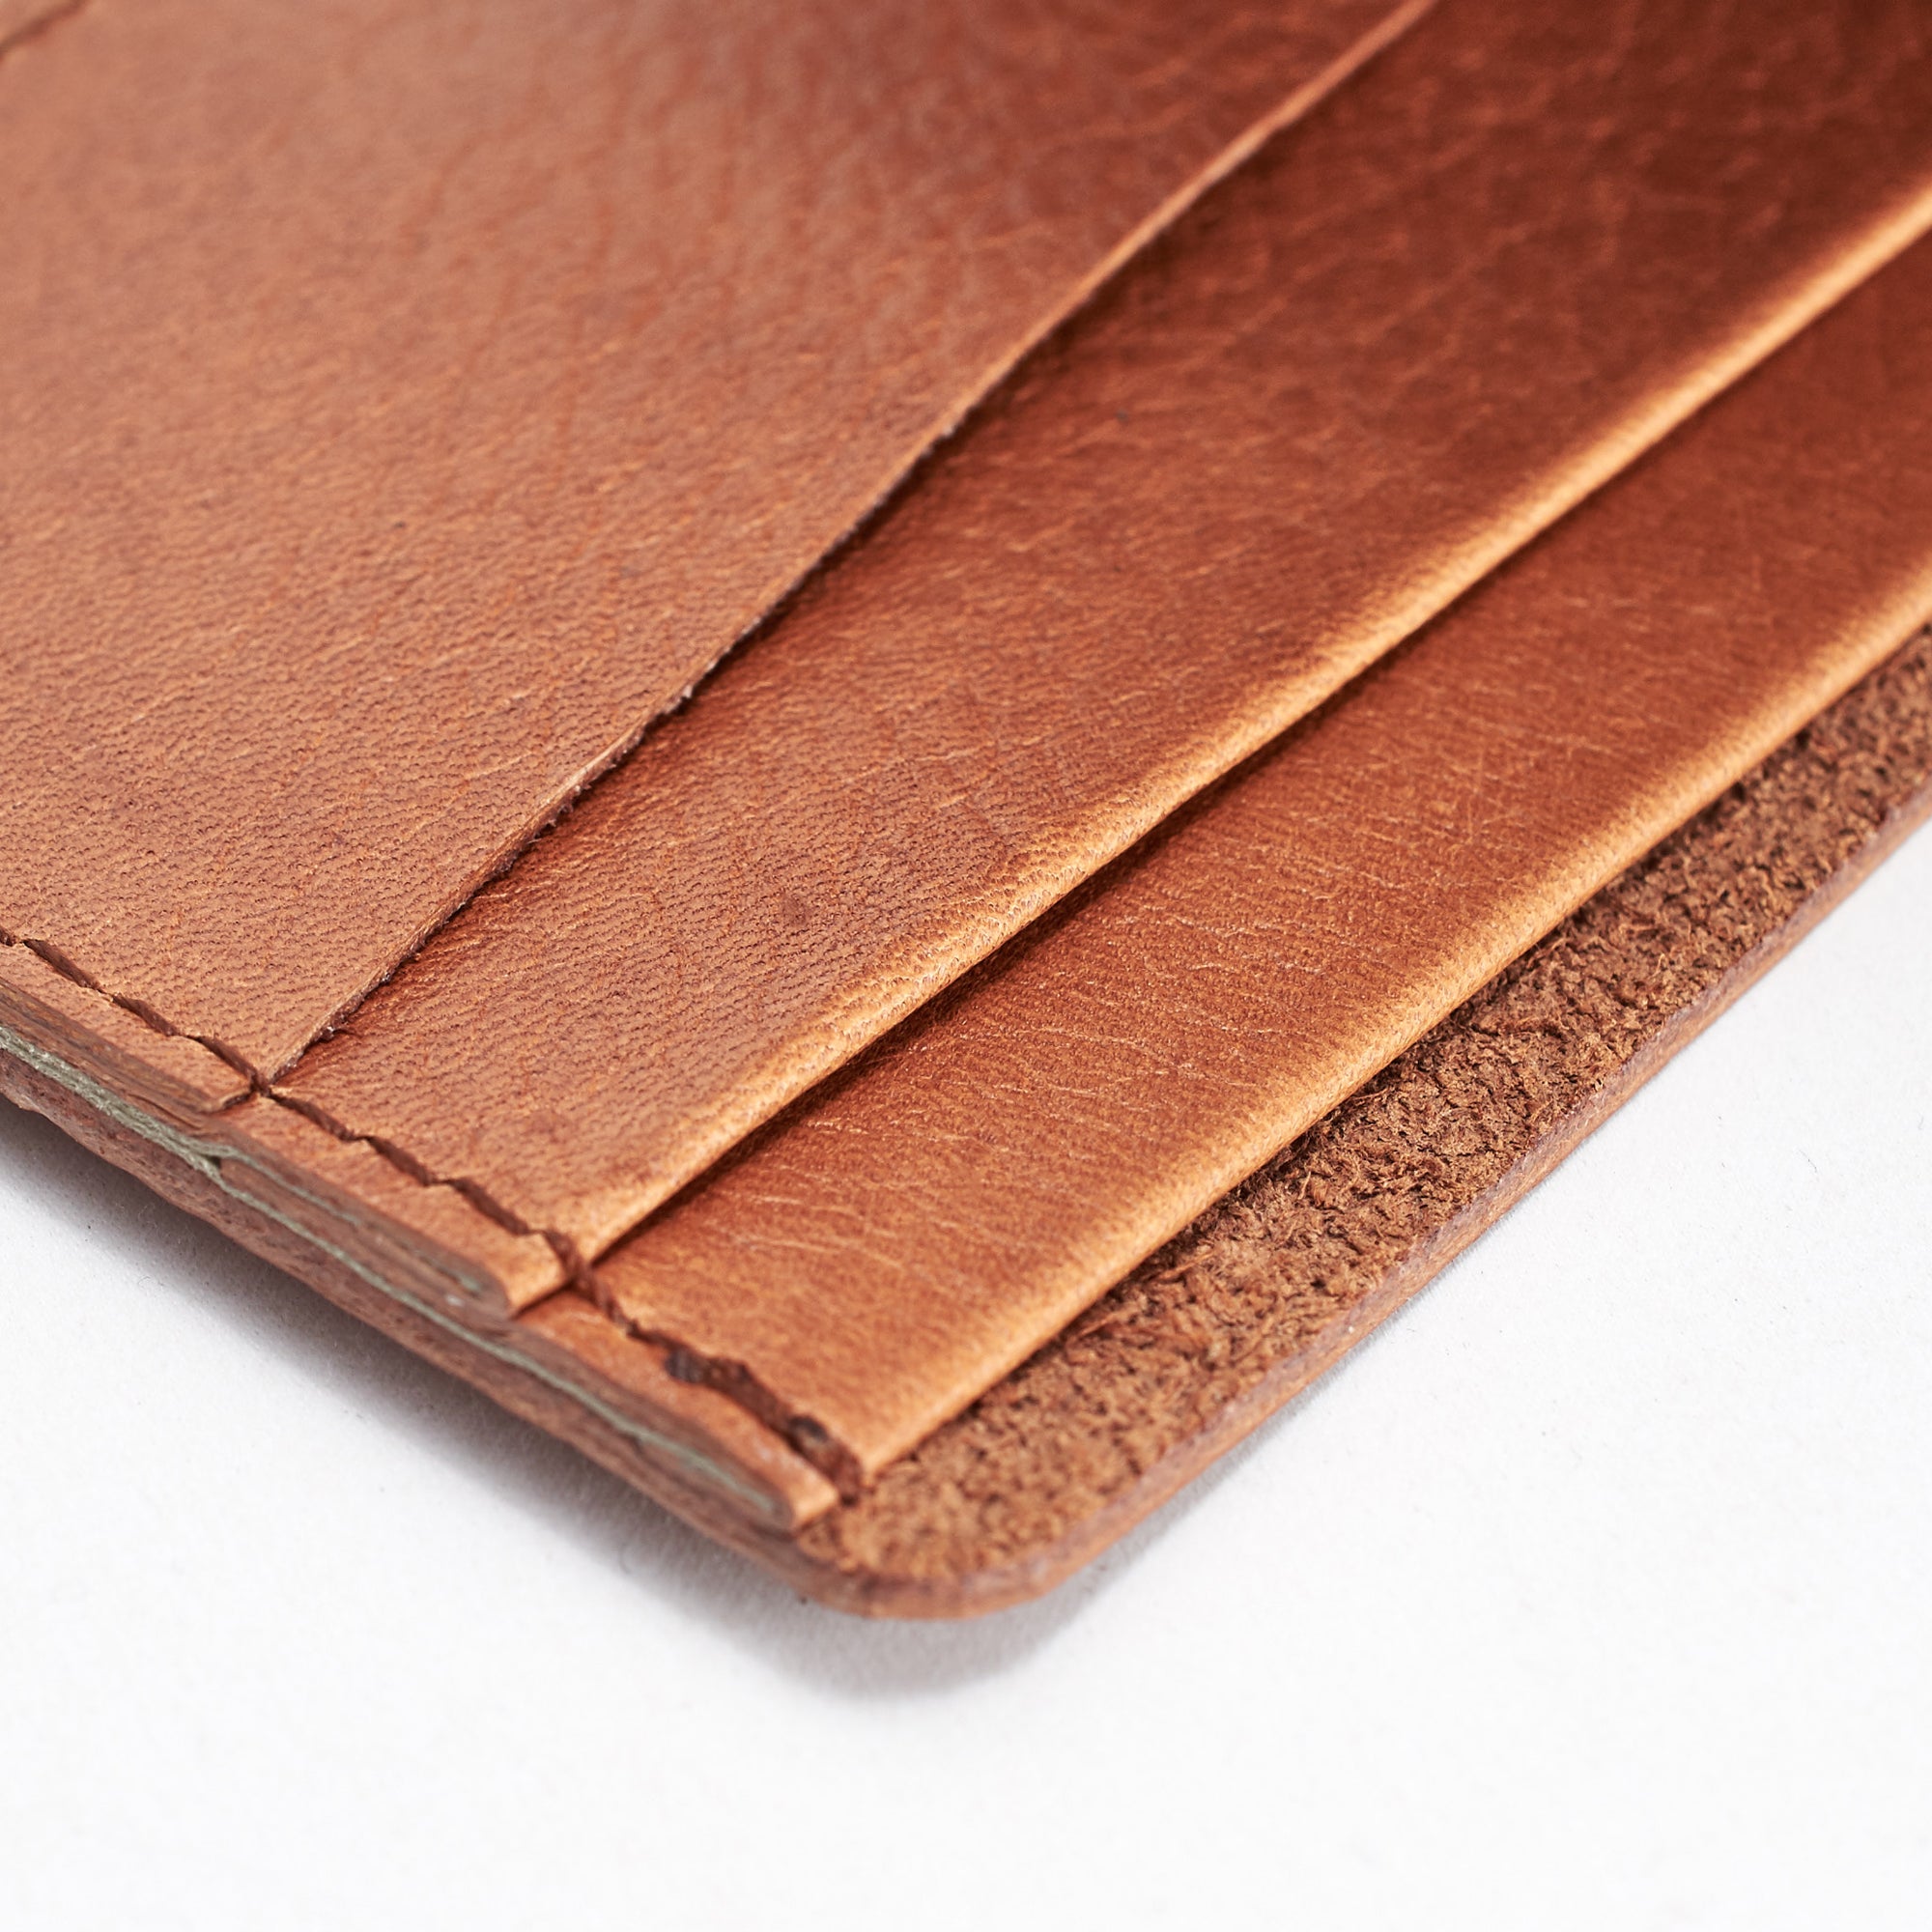 Soft interior. Slim profile. Leather light brown slim wallet gifts for men handmade accessories. minimalist full grain leather thin wallet